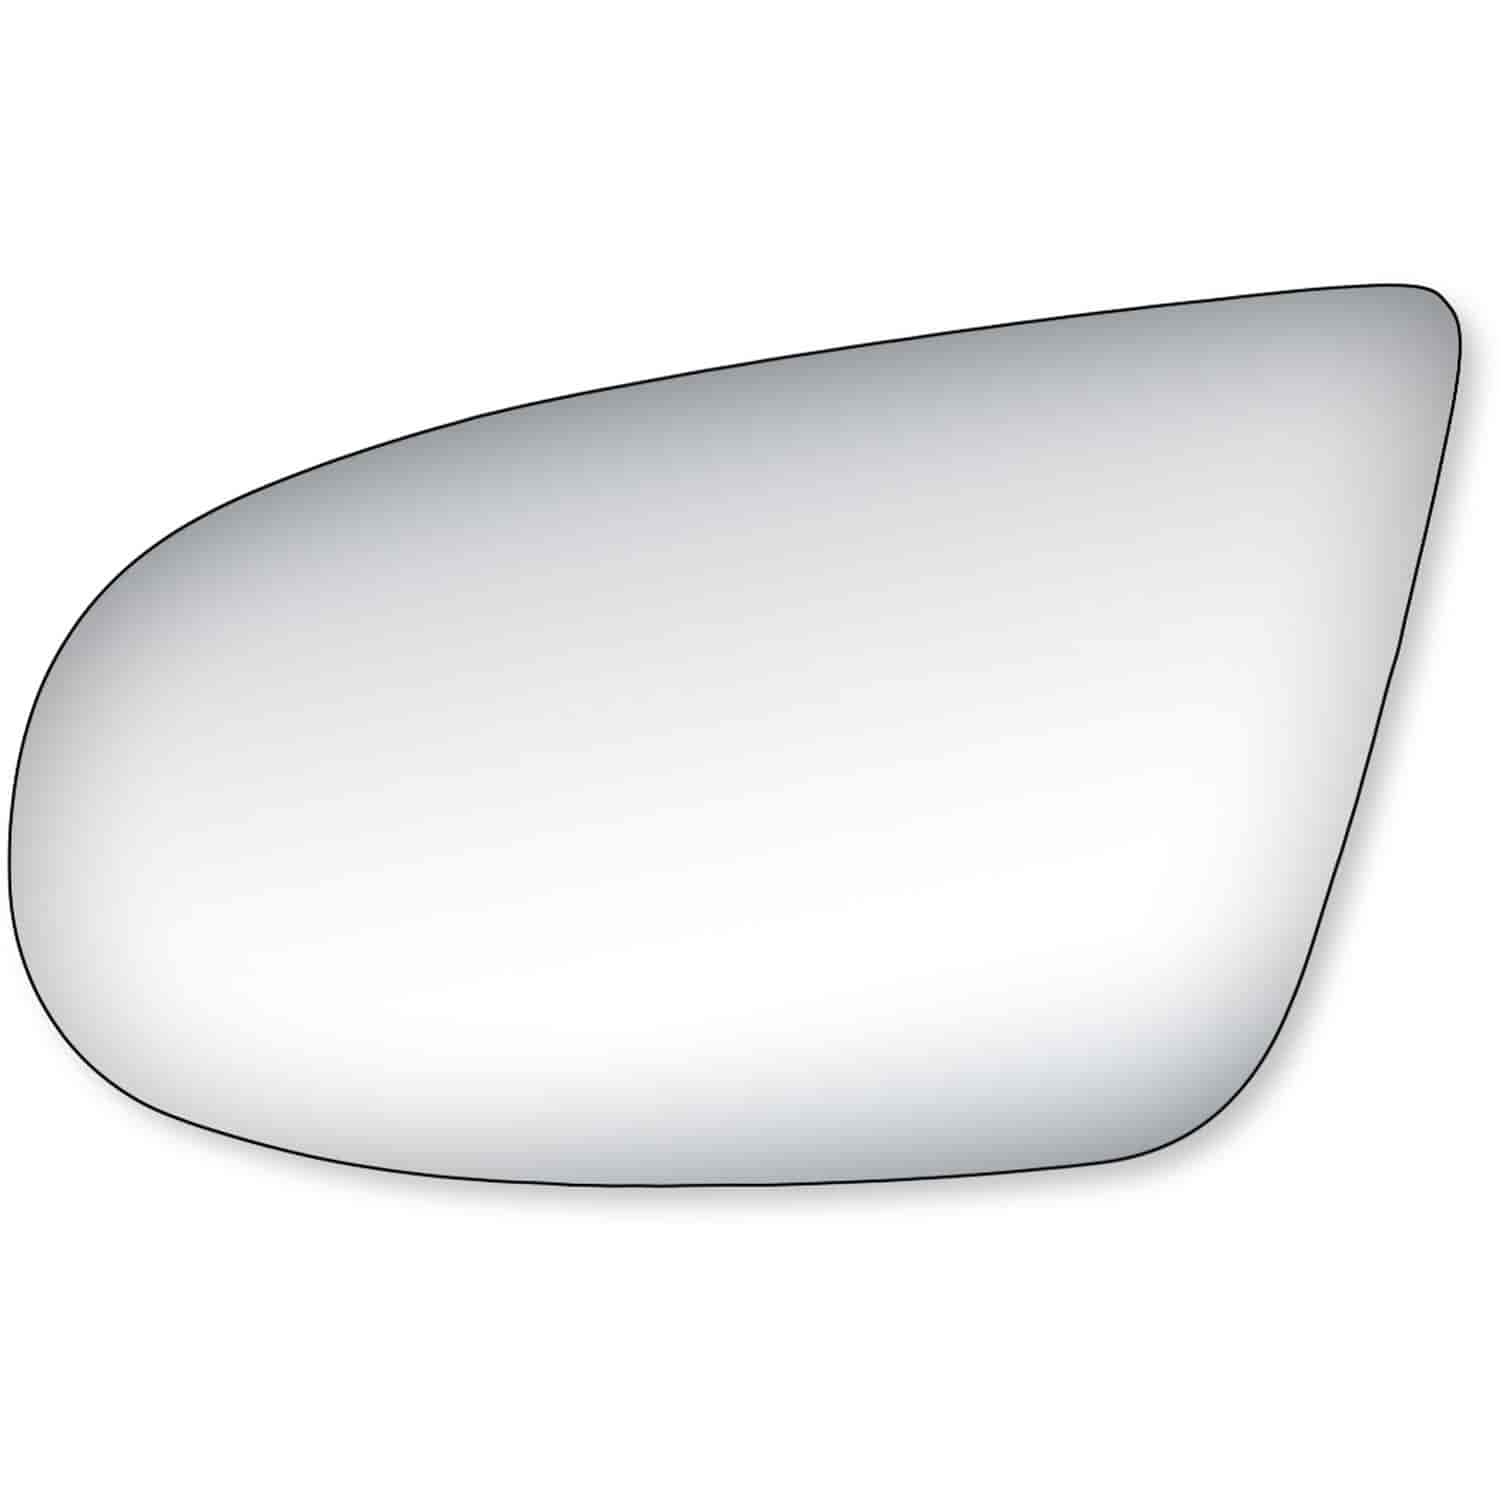 Replacement Glass for 95-99 Lumina; 95-99 Monte Carlo